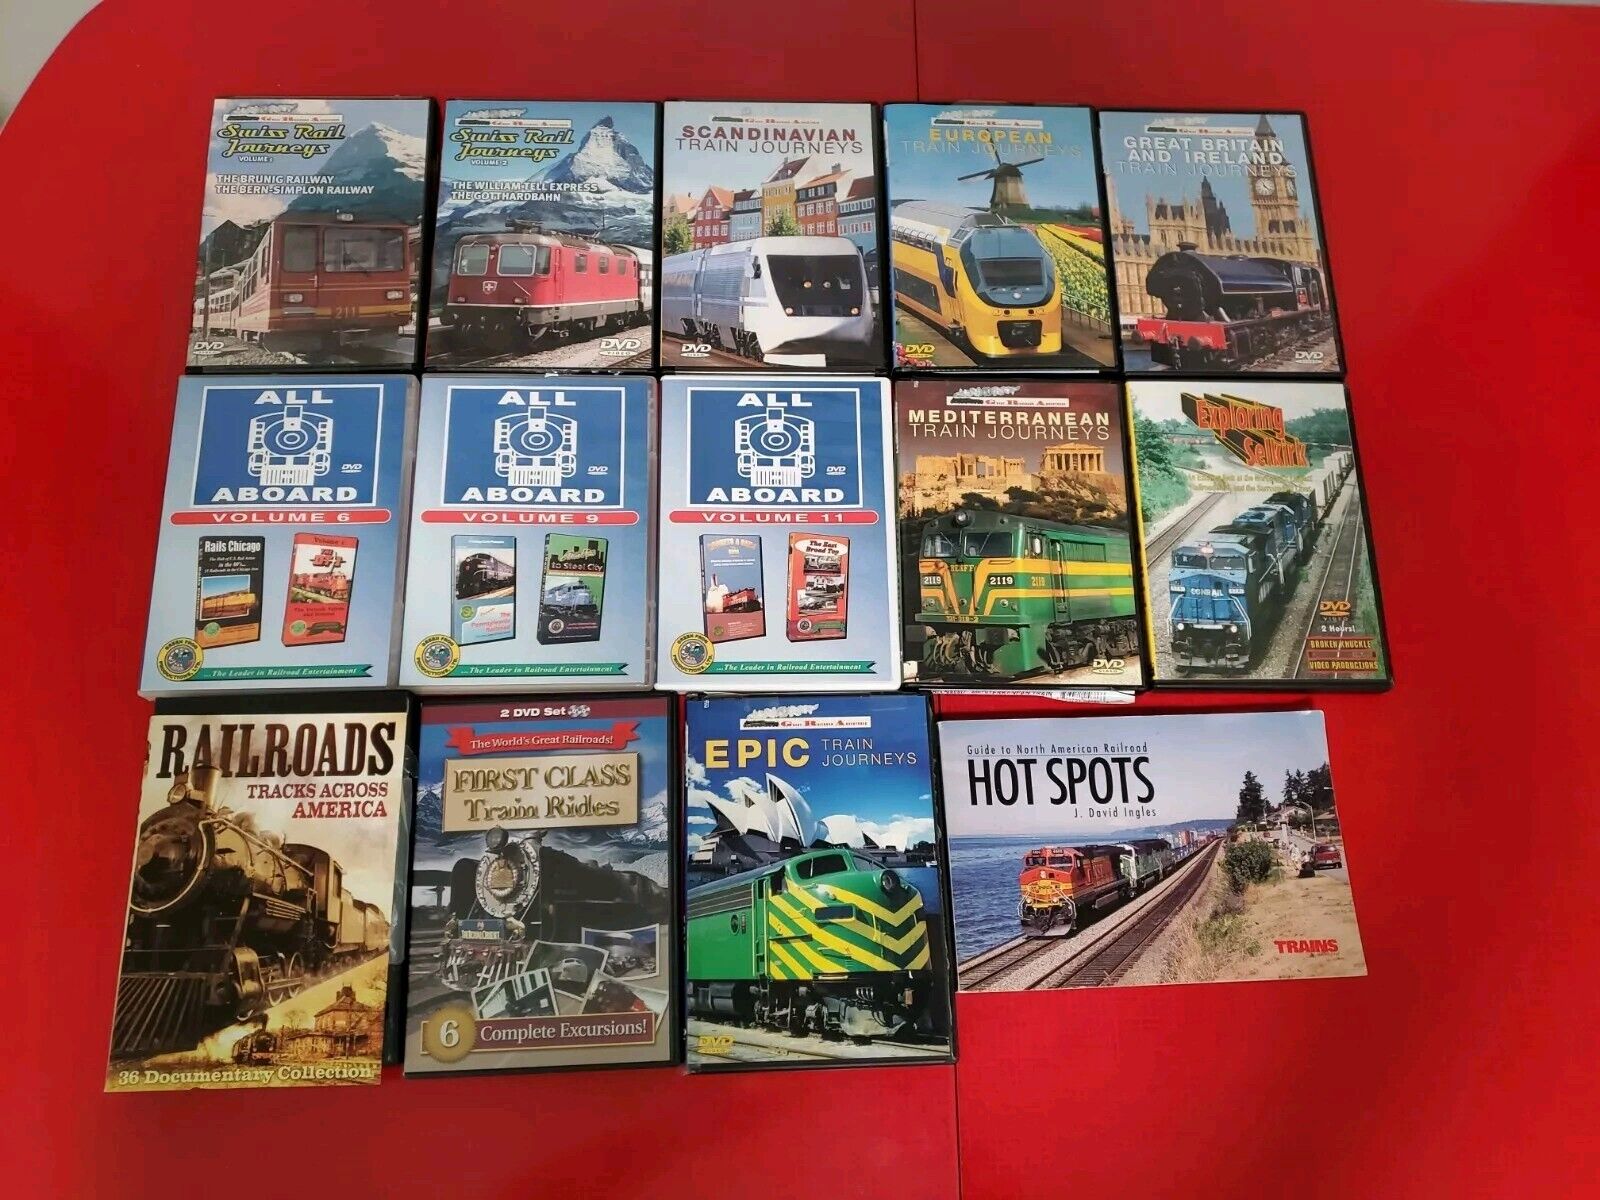 Train Railroad Videos Lot of 13 DVDs Train Locomotive Movies And Book